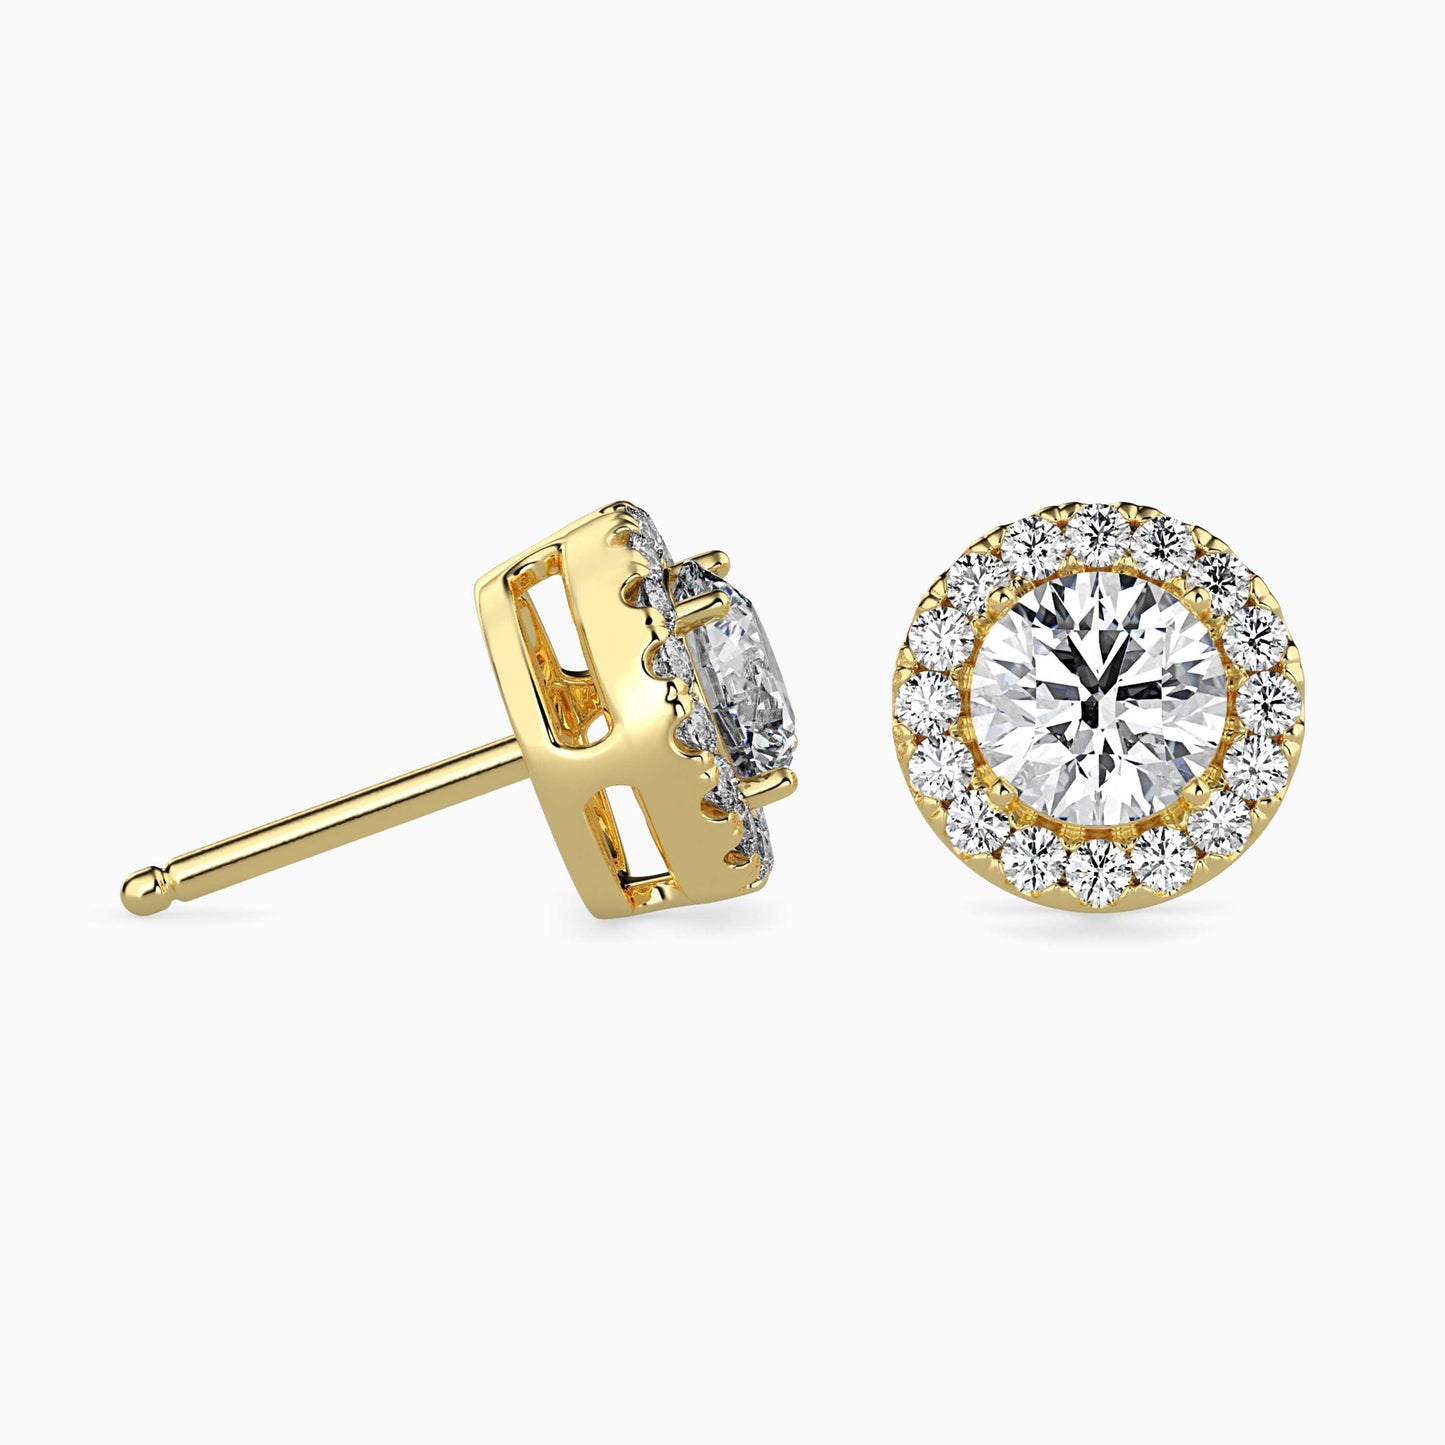 Diamond Delights Solitaire Earring